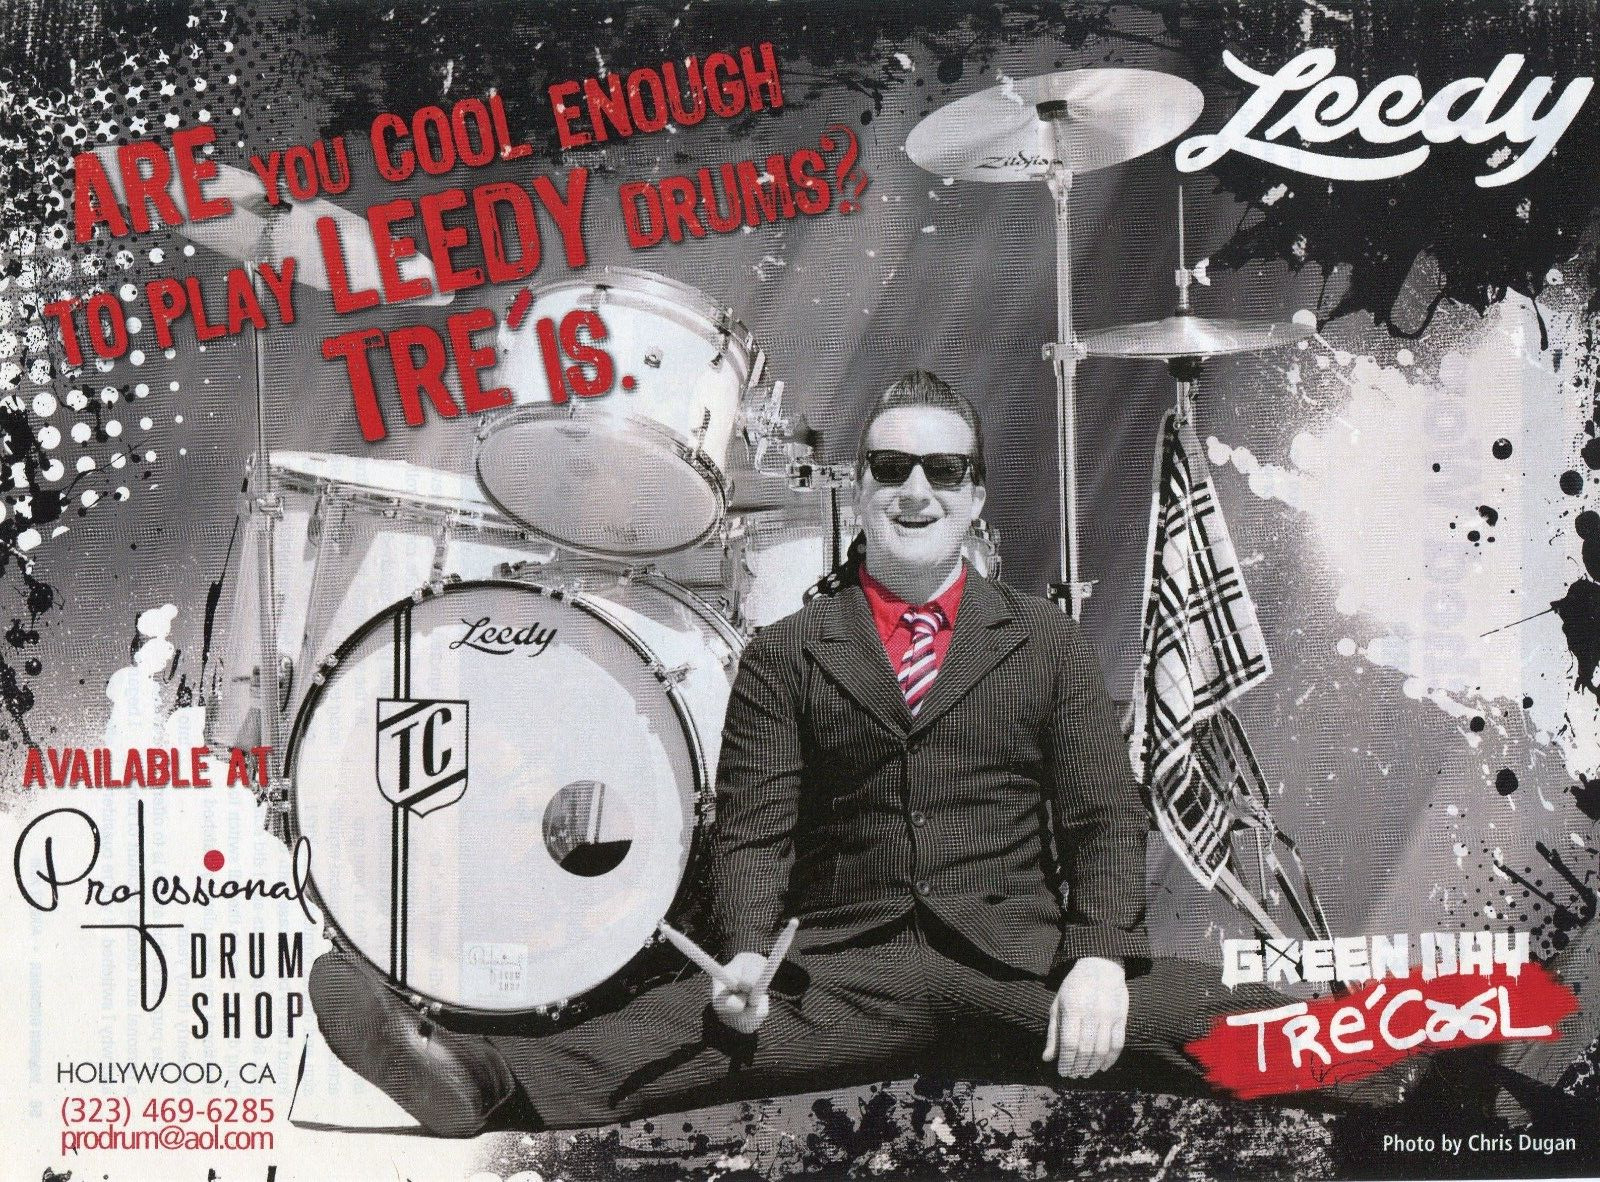 2009 Print Ad of Leedy Drums w Tre Cool of Green Day